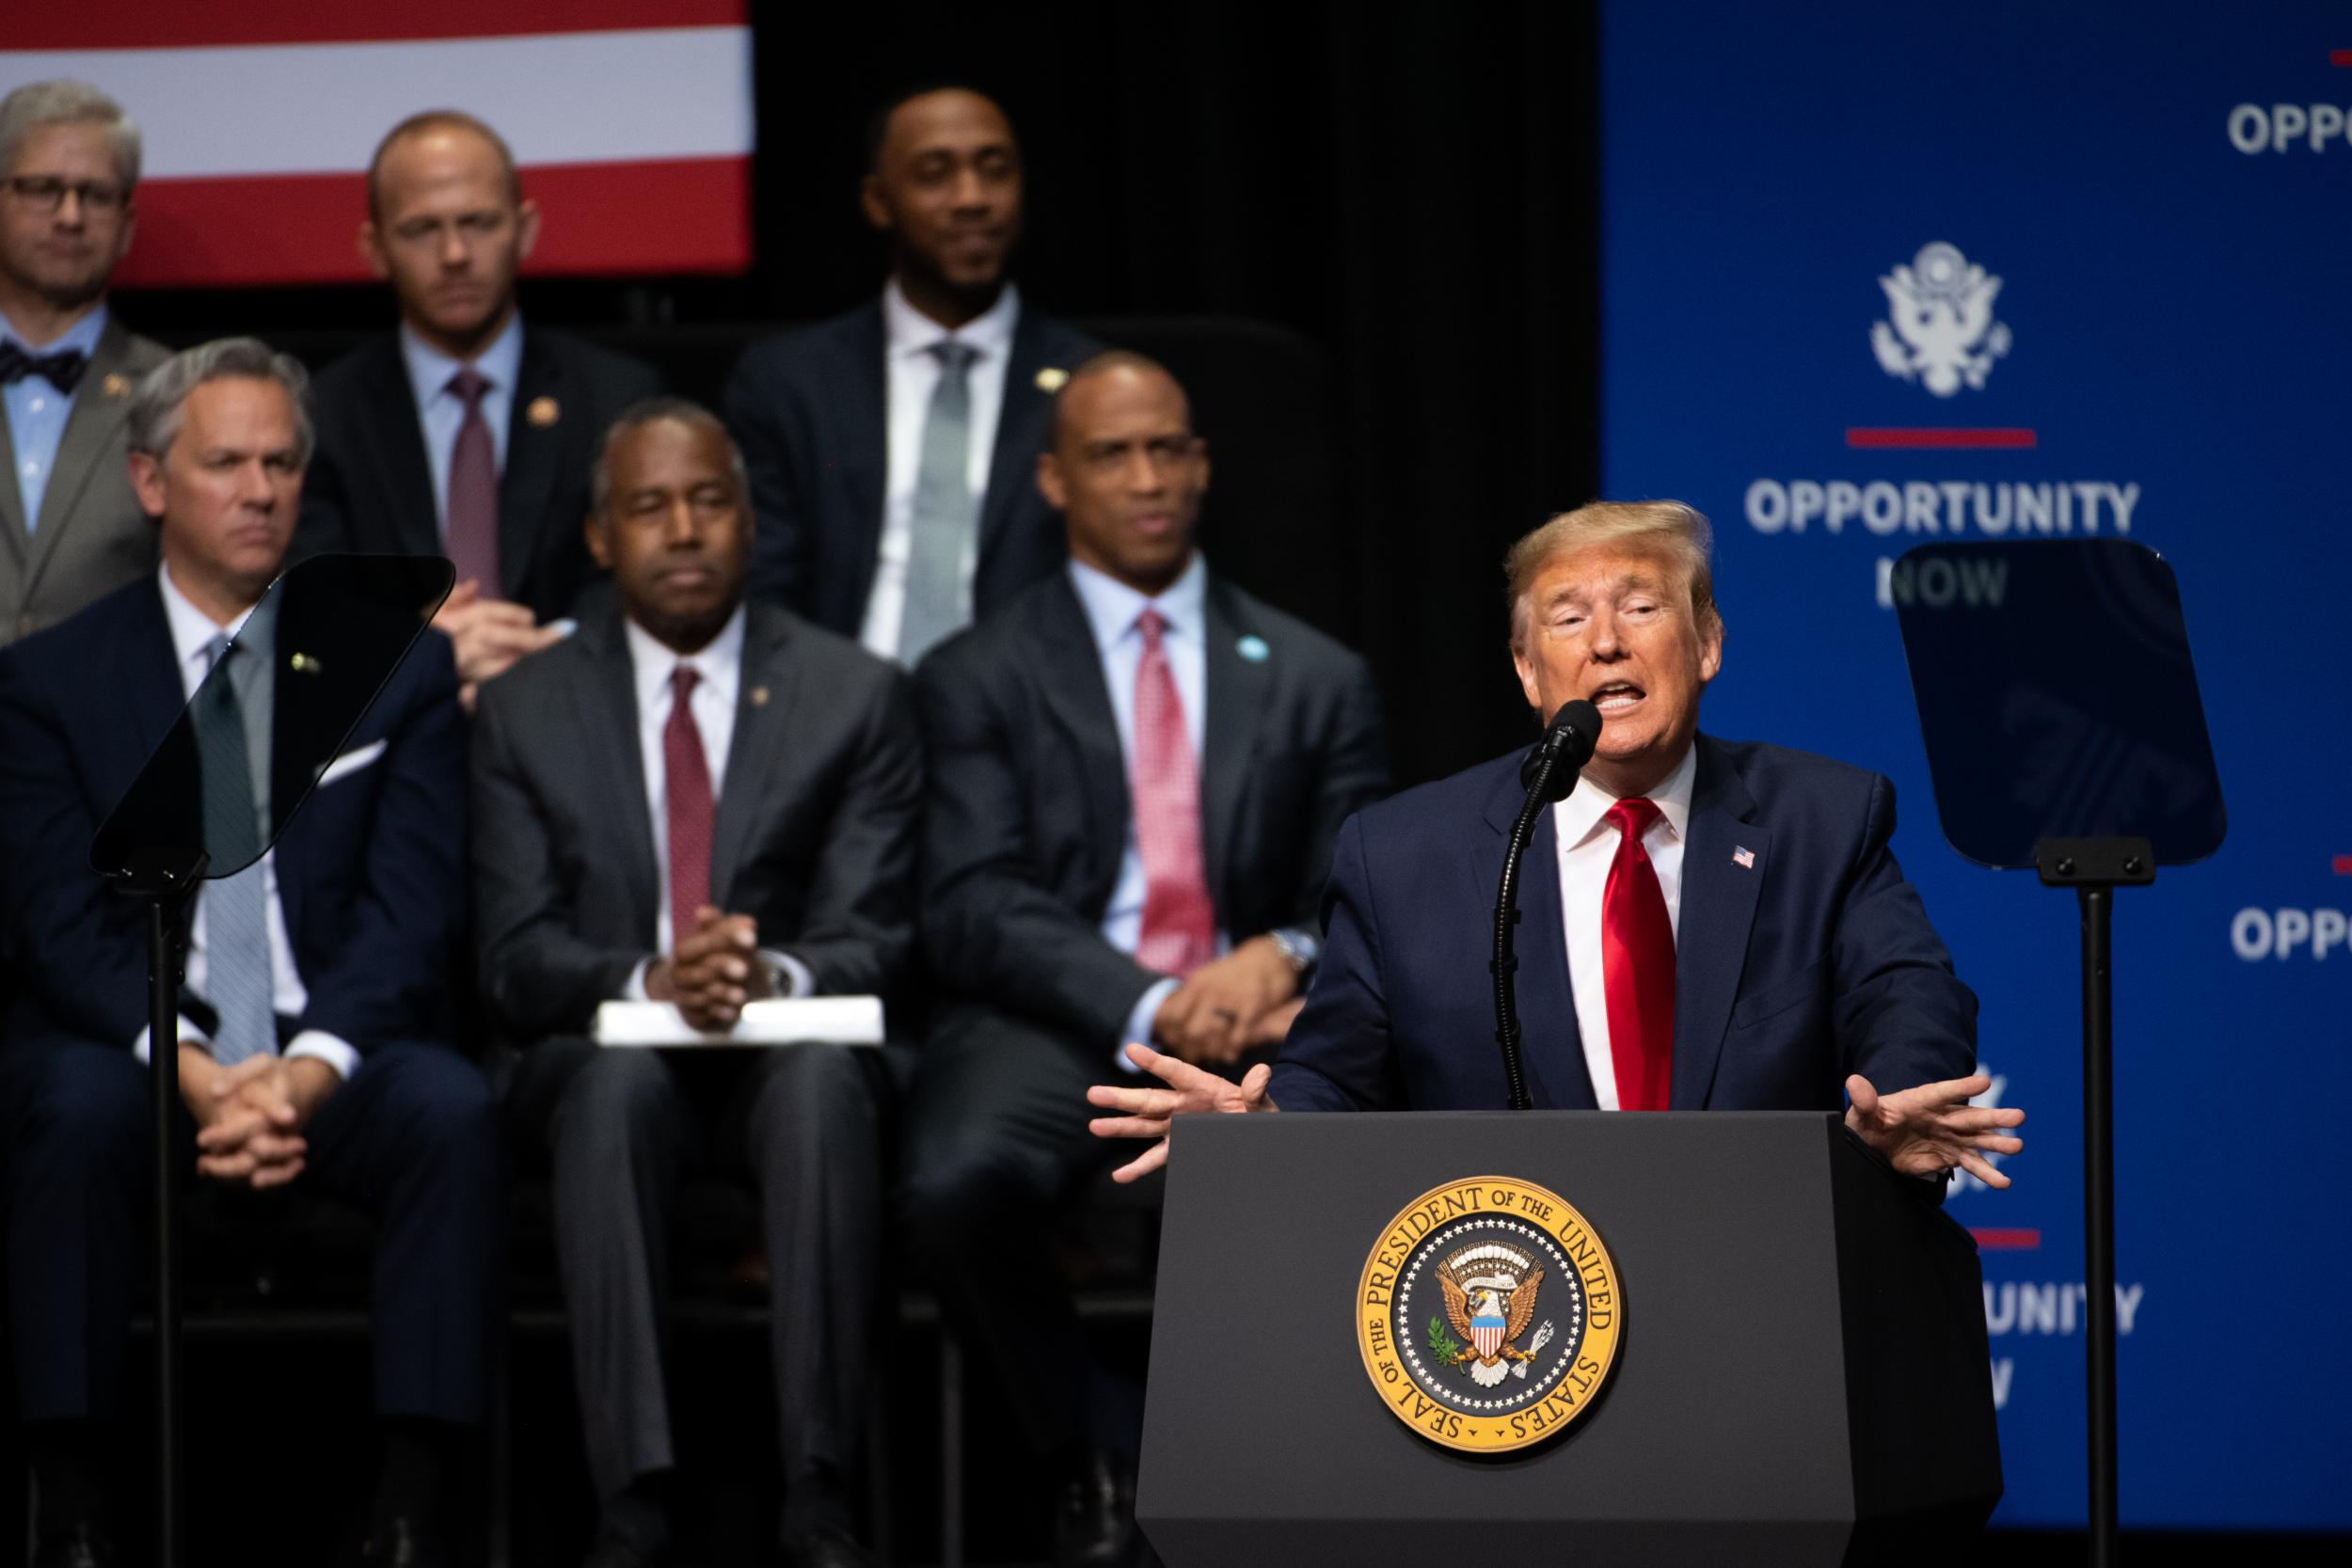 Donald Trump addresses the crowd during the Opportunity Now summit in Charlotte, North Carolina.